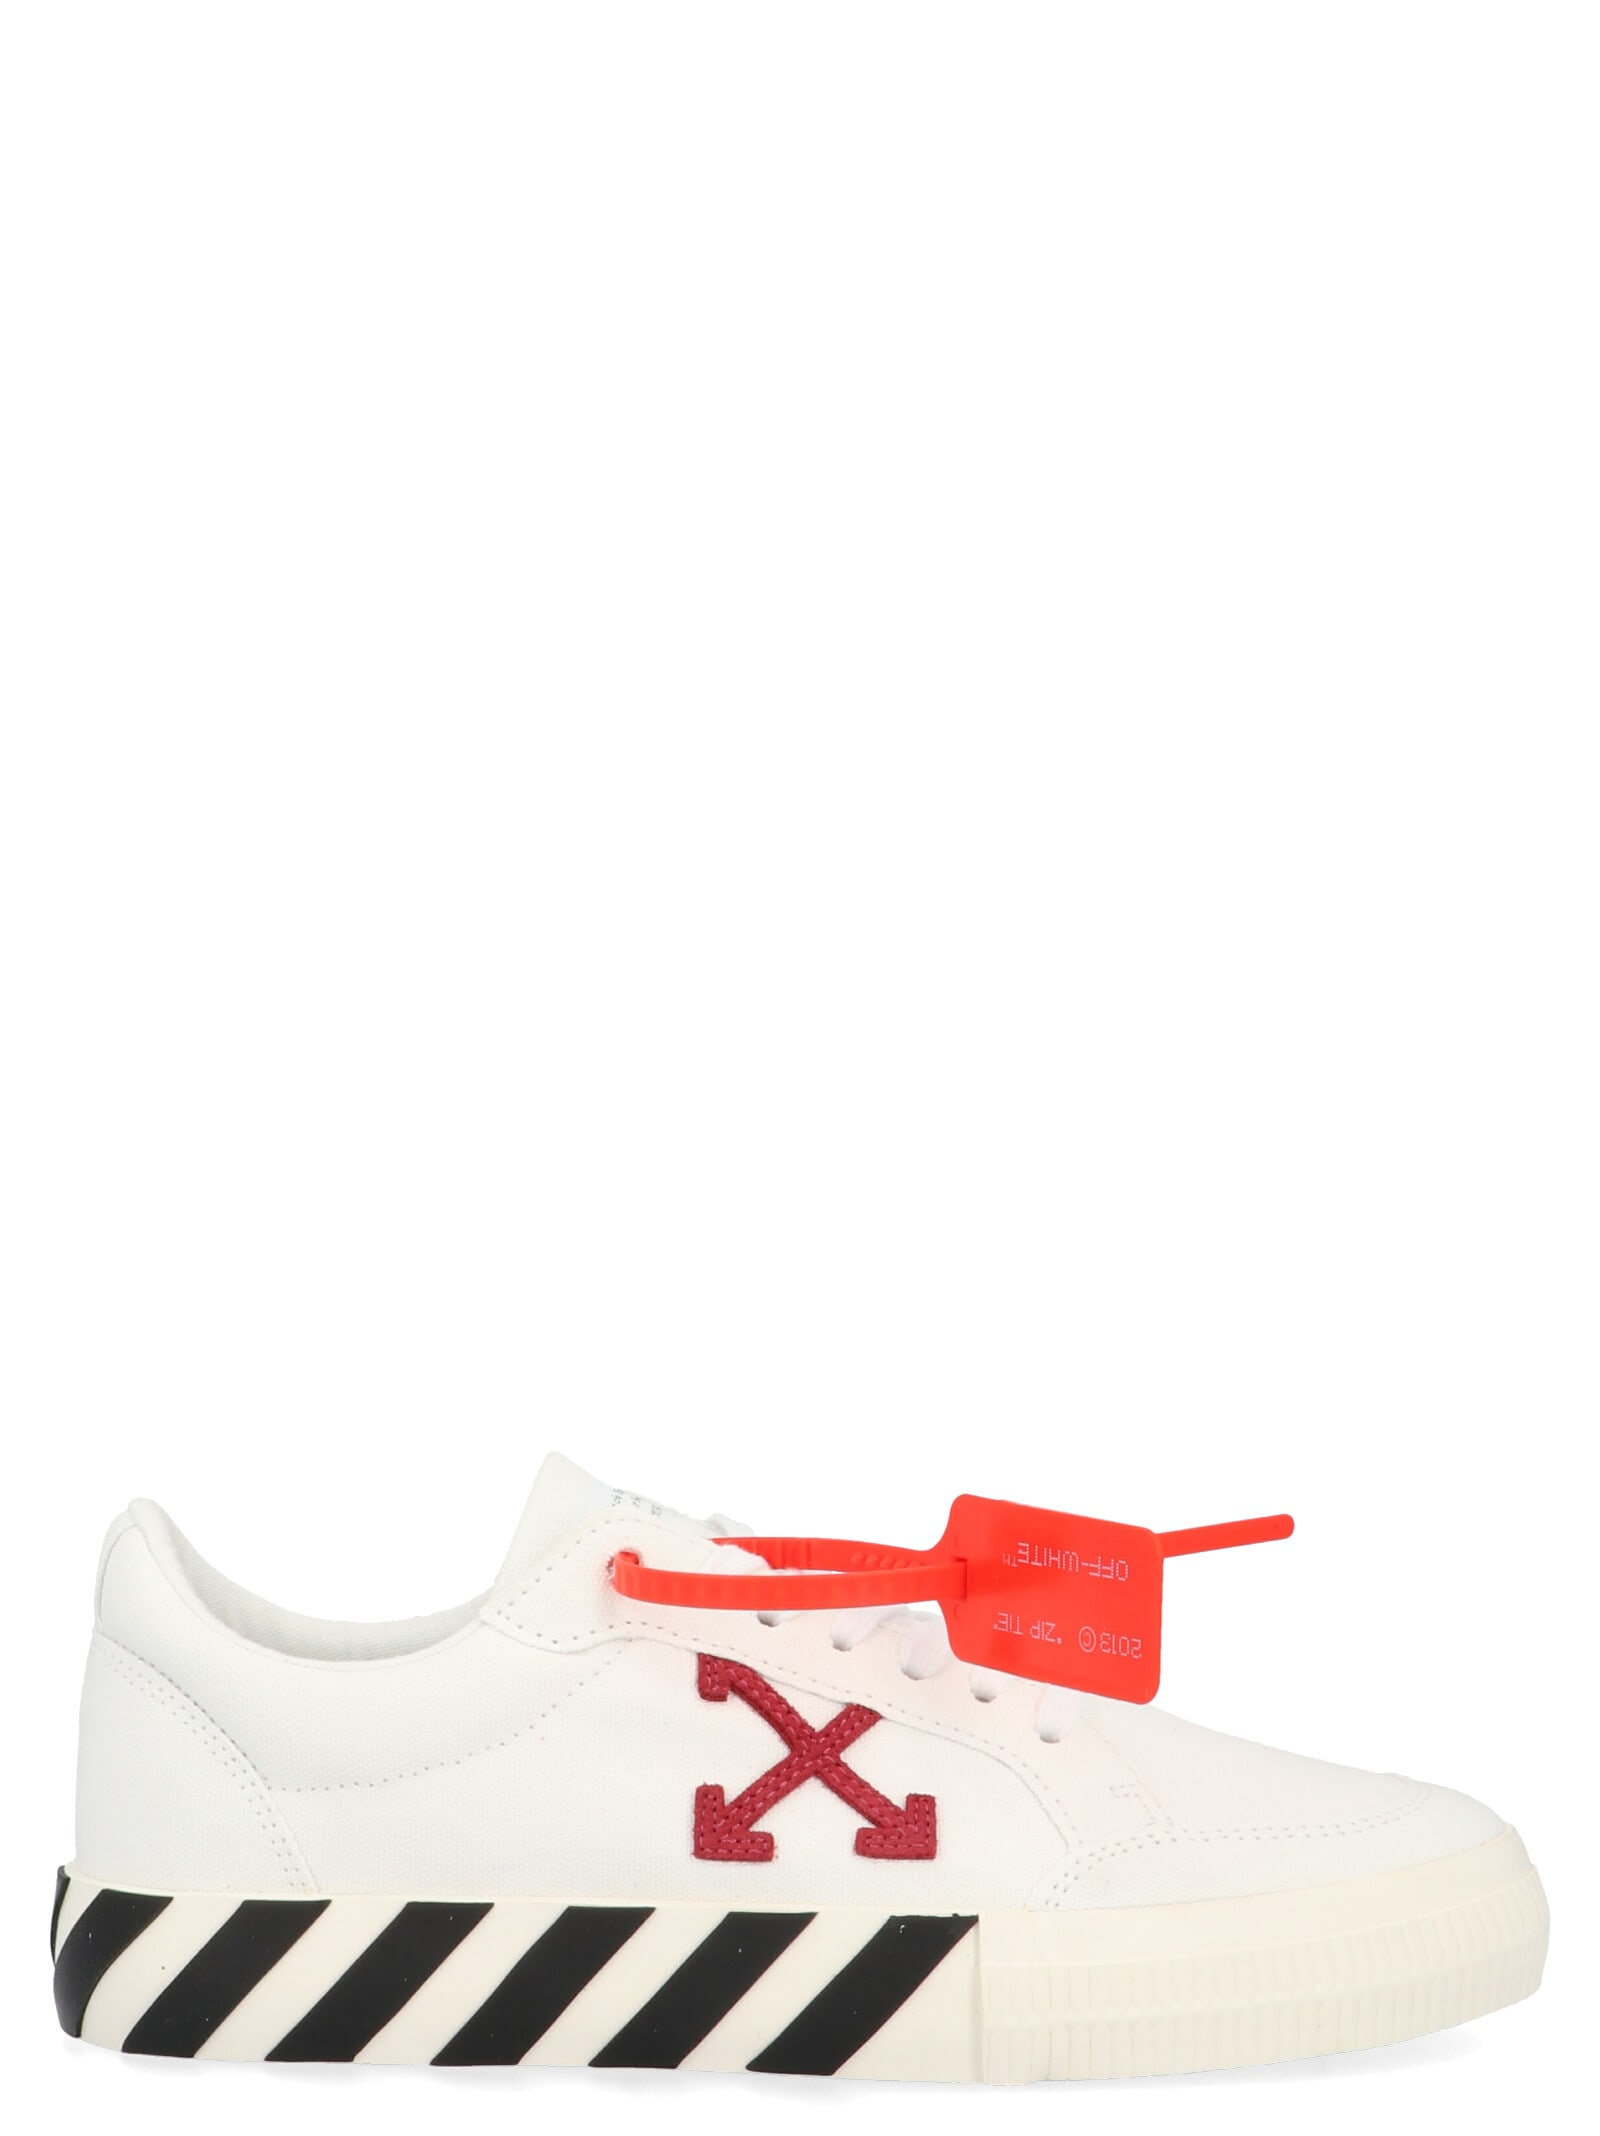 OFF-WHITE OFF-WHITE ARROW SHOES,11207968